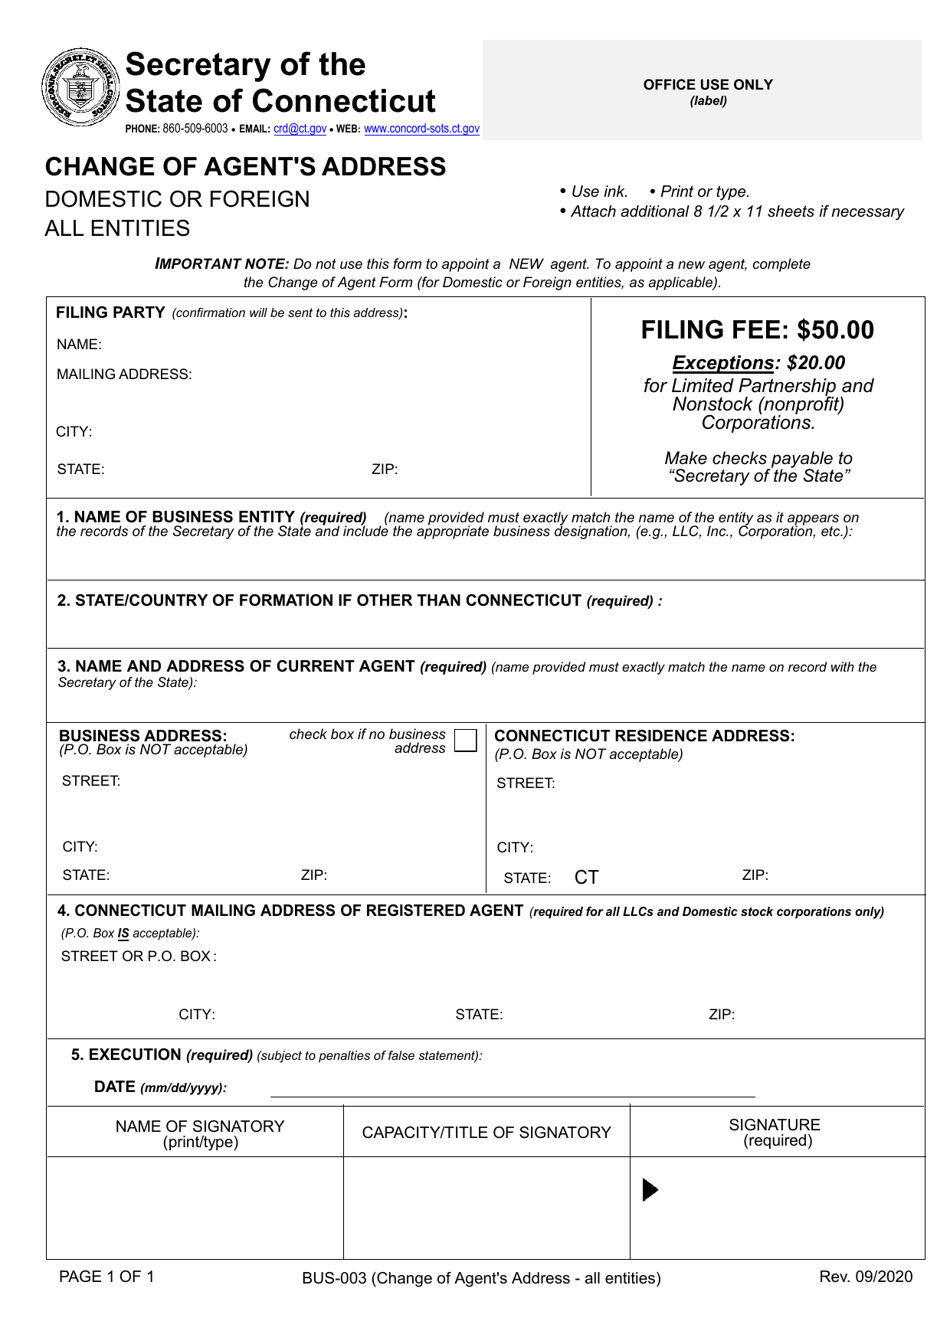 Form BUS-003 Change of Agent's Address Domestic or Foreign - All Entities - Connecticut, Page 1